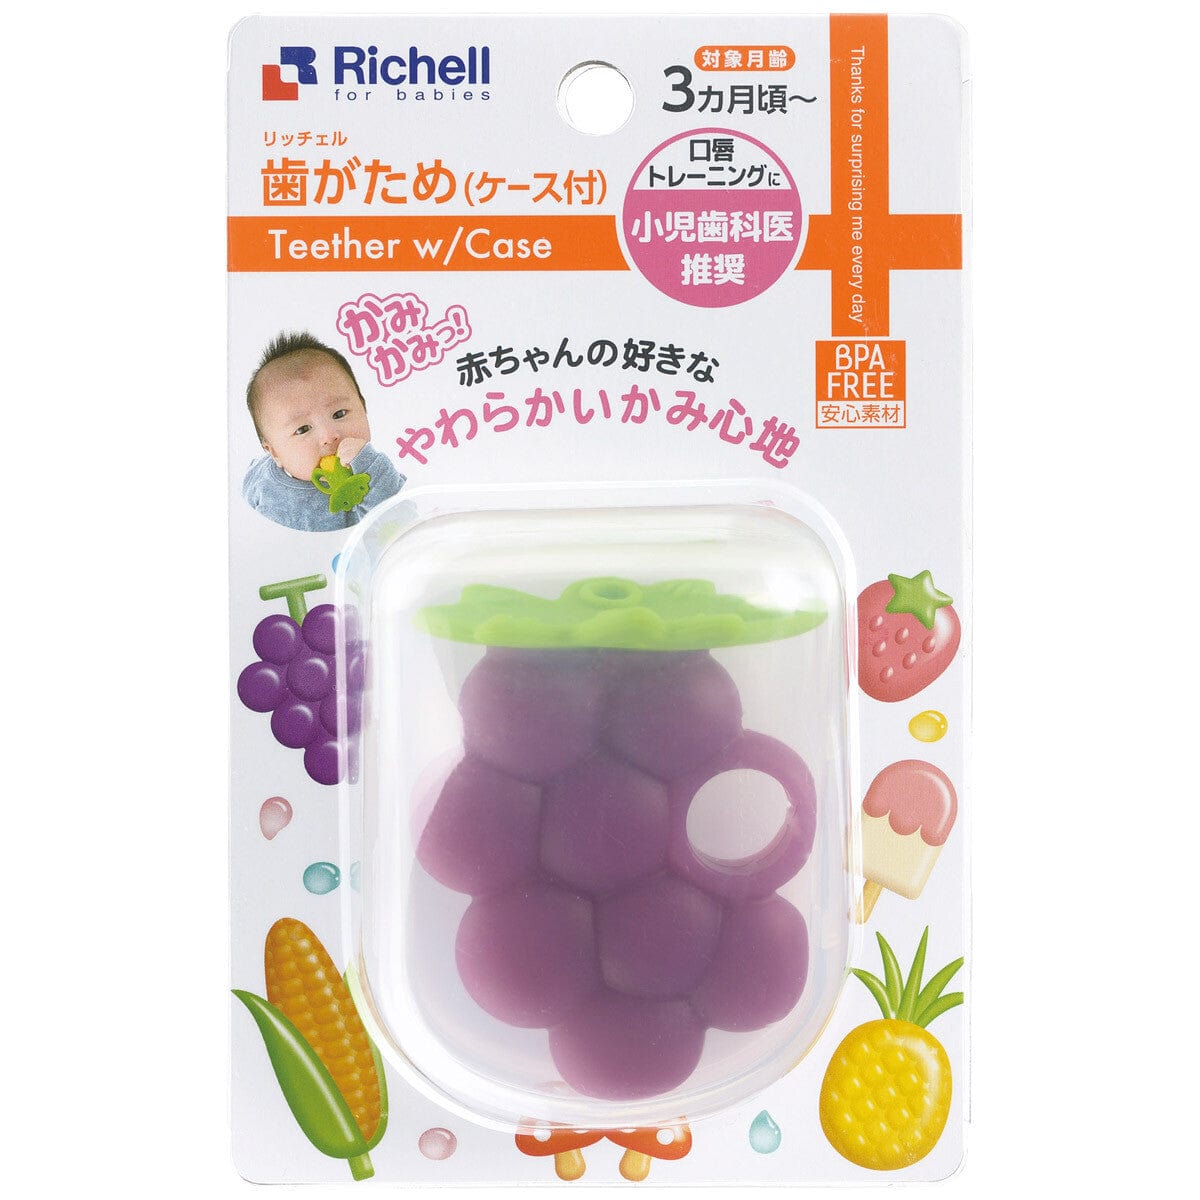 Richell - Baby Silicone Teether with Storage Case - Purple Baby Teethers 4973655220283 Durio.sg